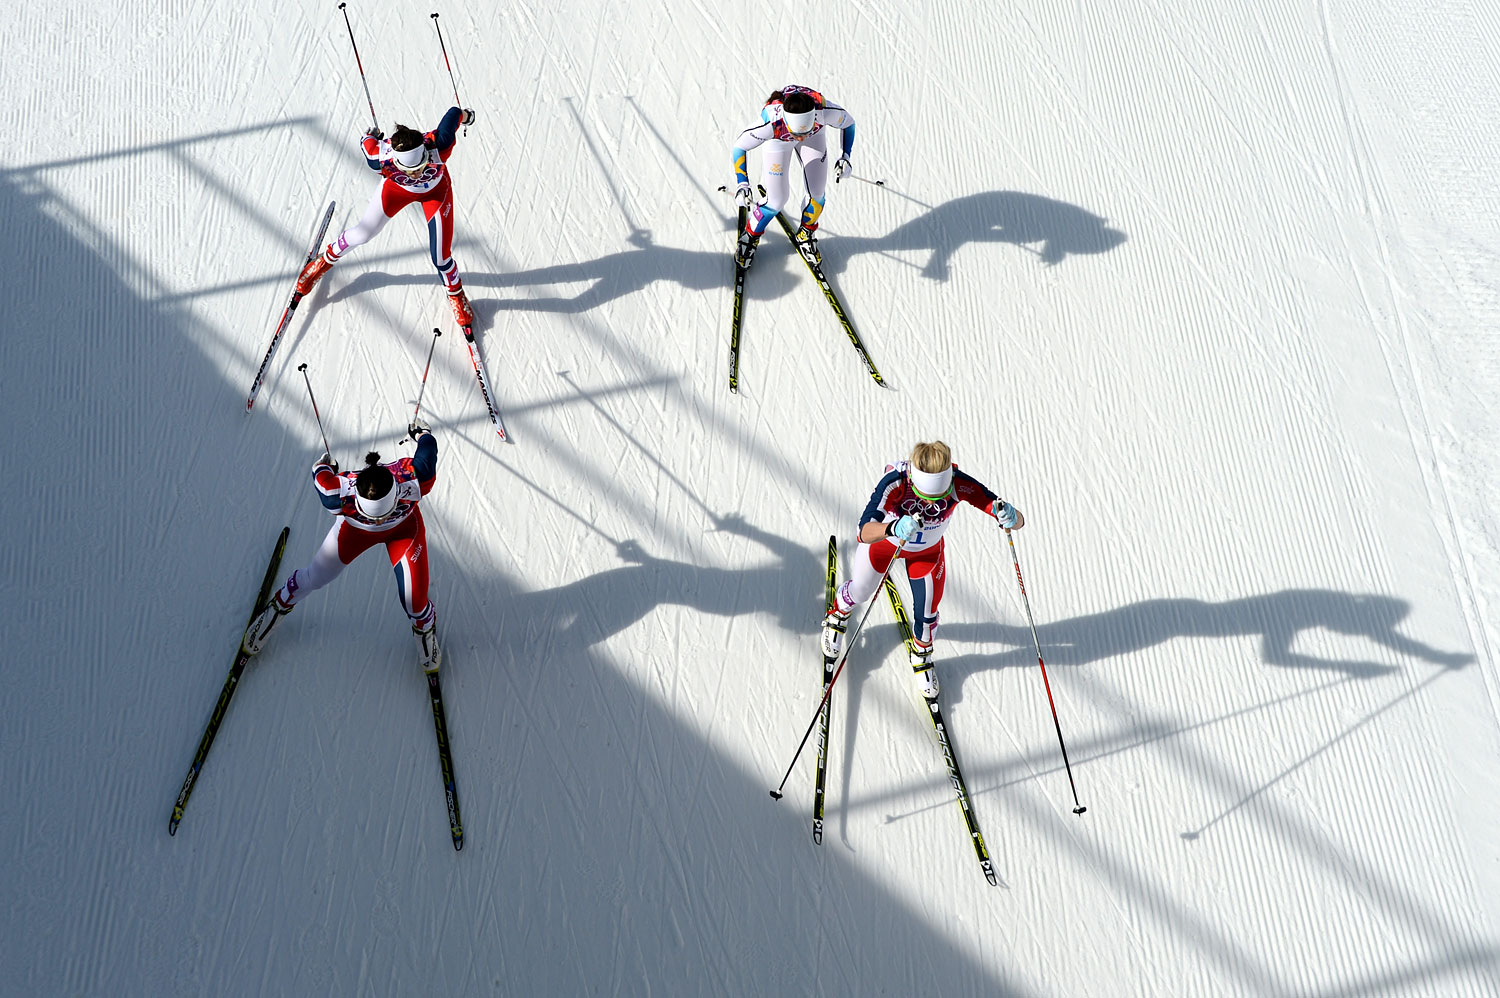 Norway's Therese Johaug, front right, competes with other athletes in the Women's Cross-Country Skiing 30km Mass Start Free.